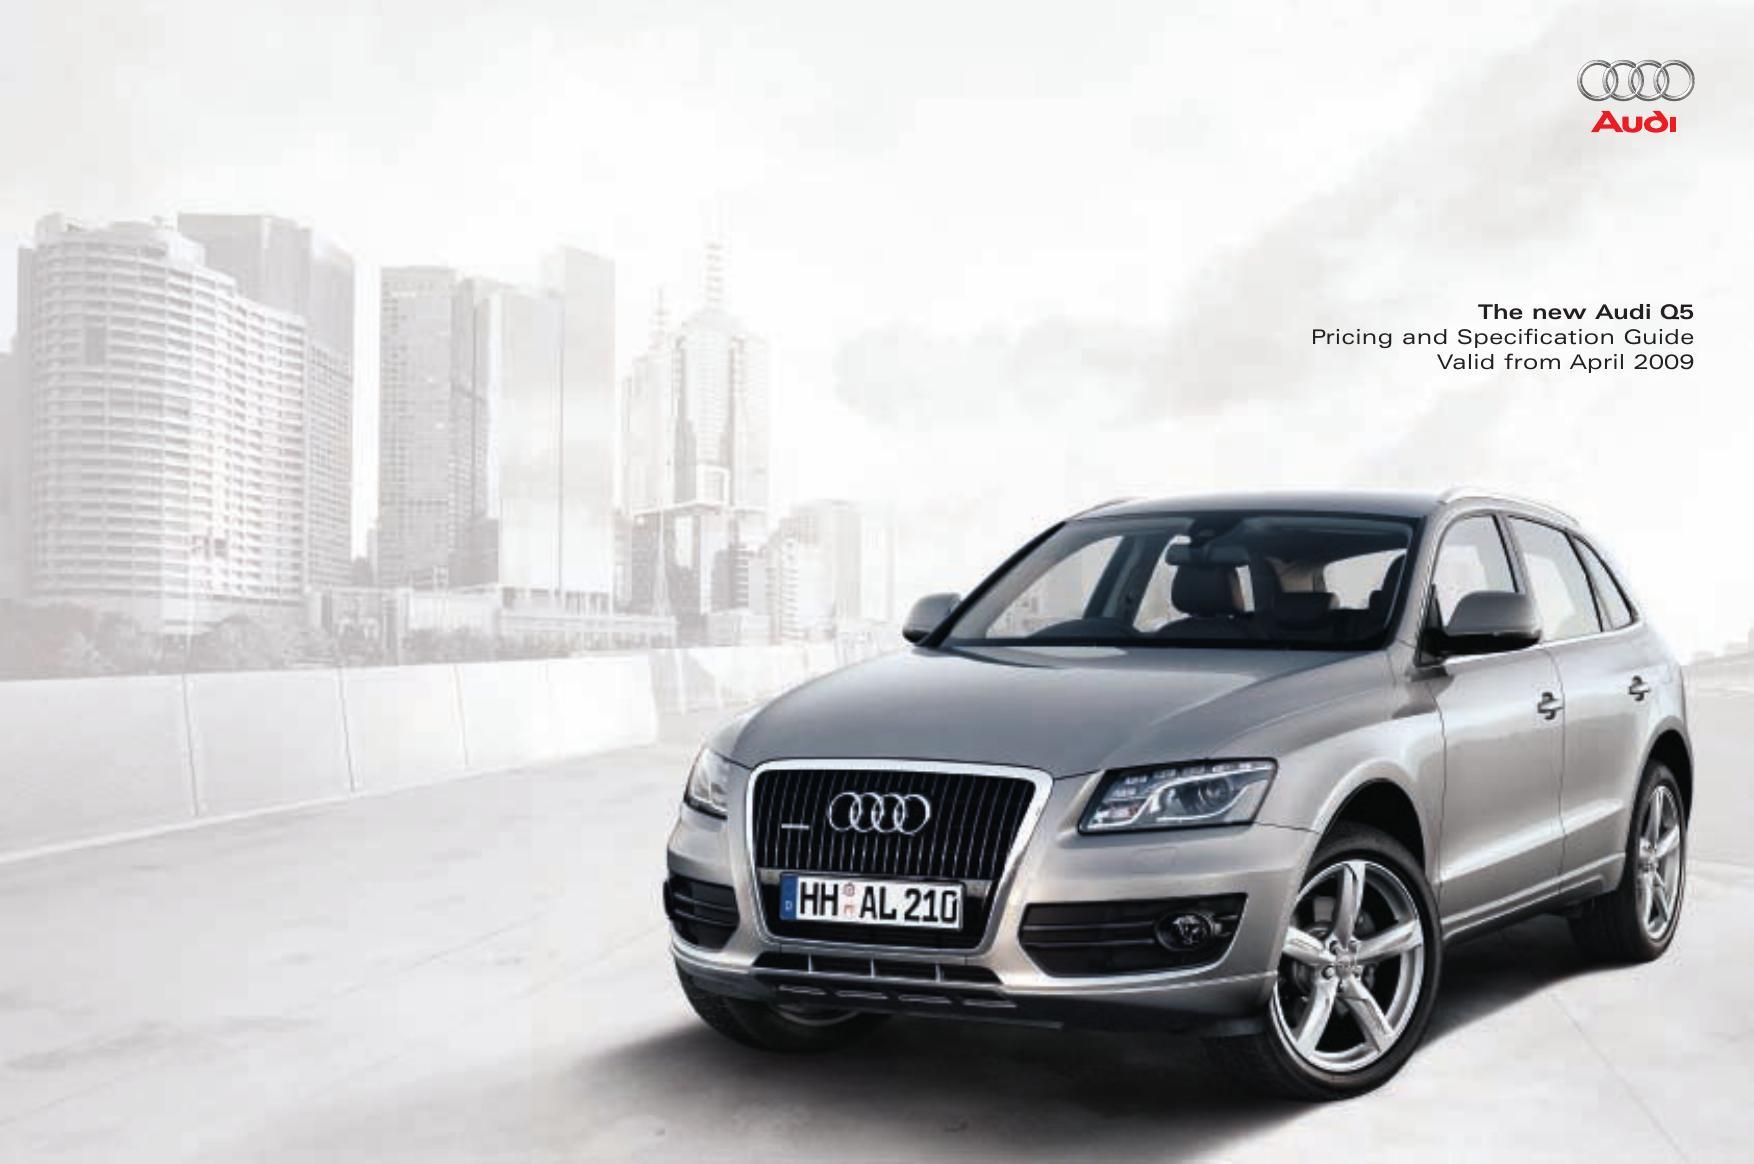 the-new-audi-q5-pricing-and-specification-guide-valid-from-april-2009.pdf